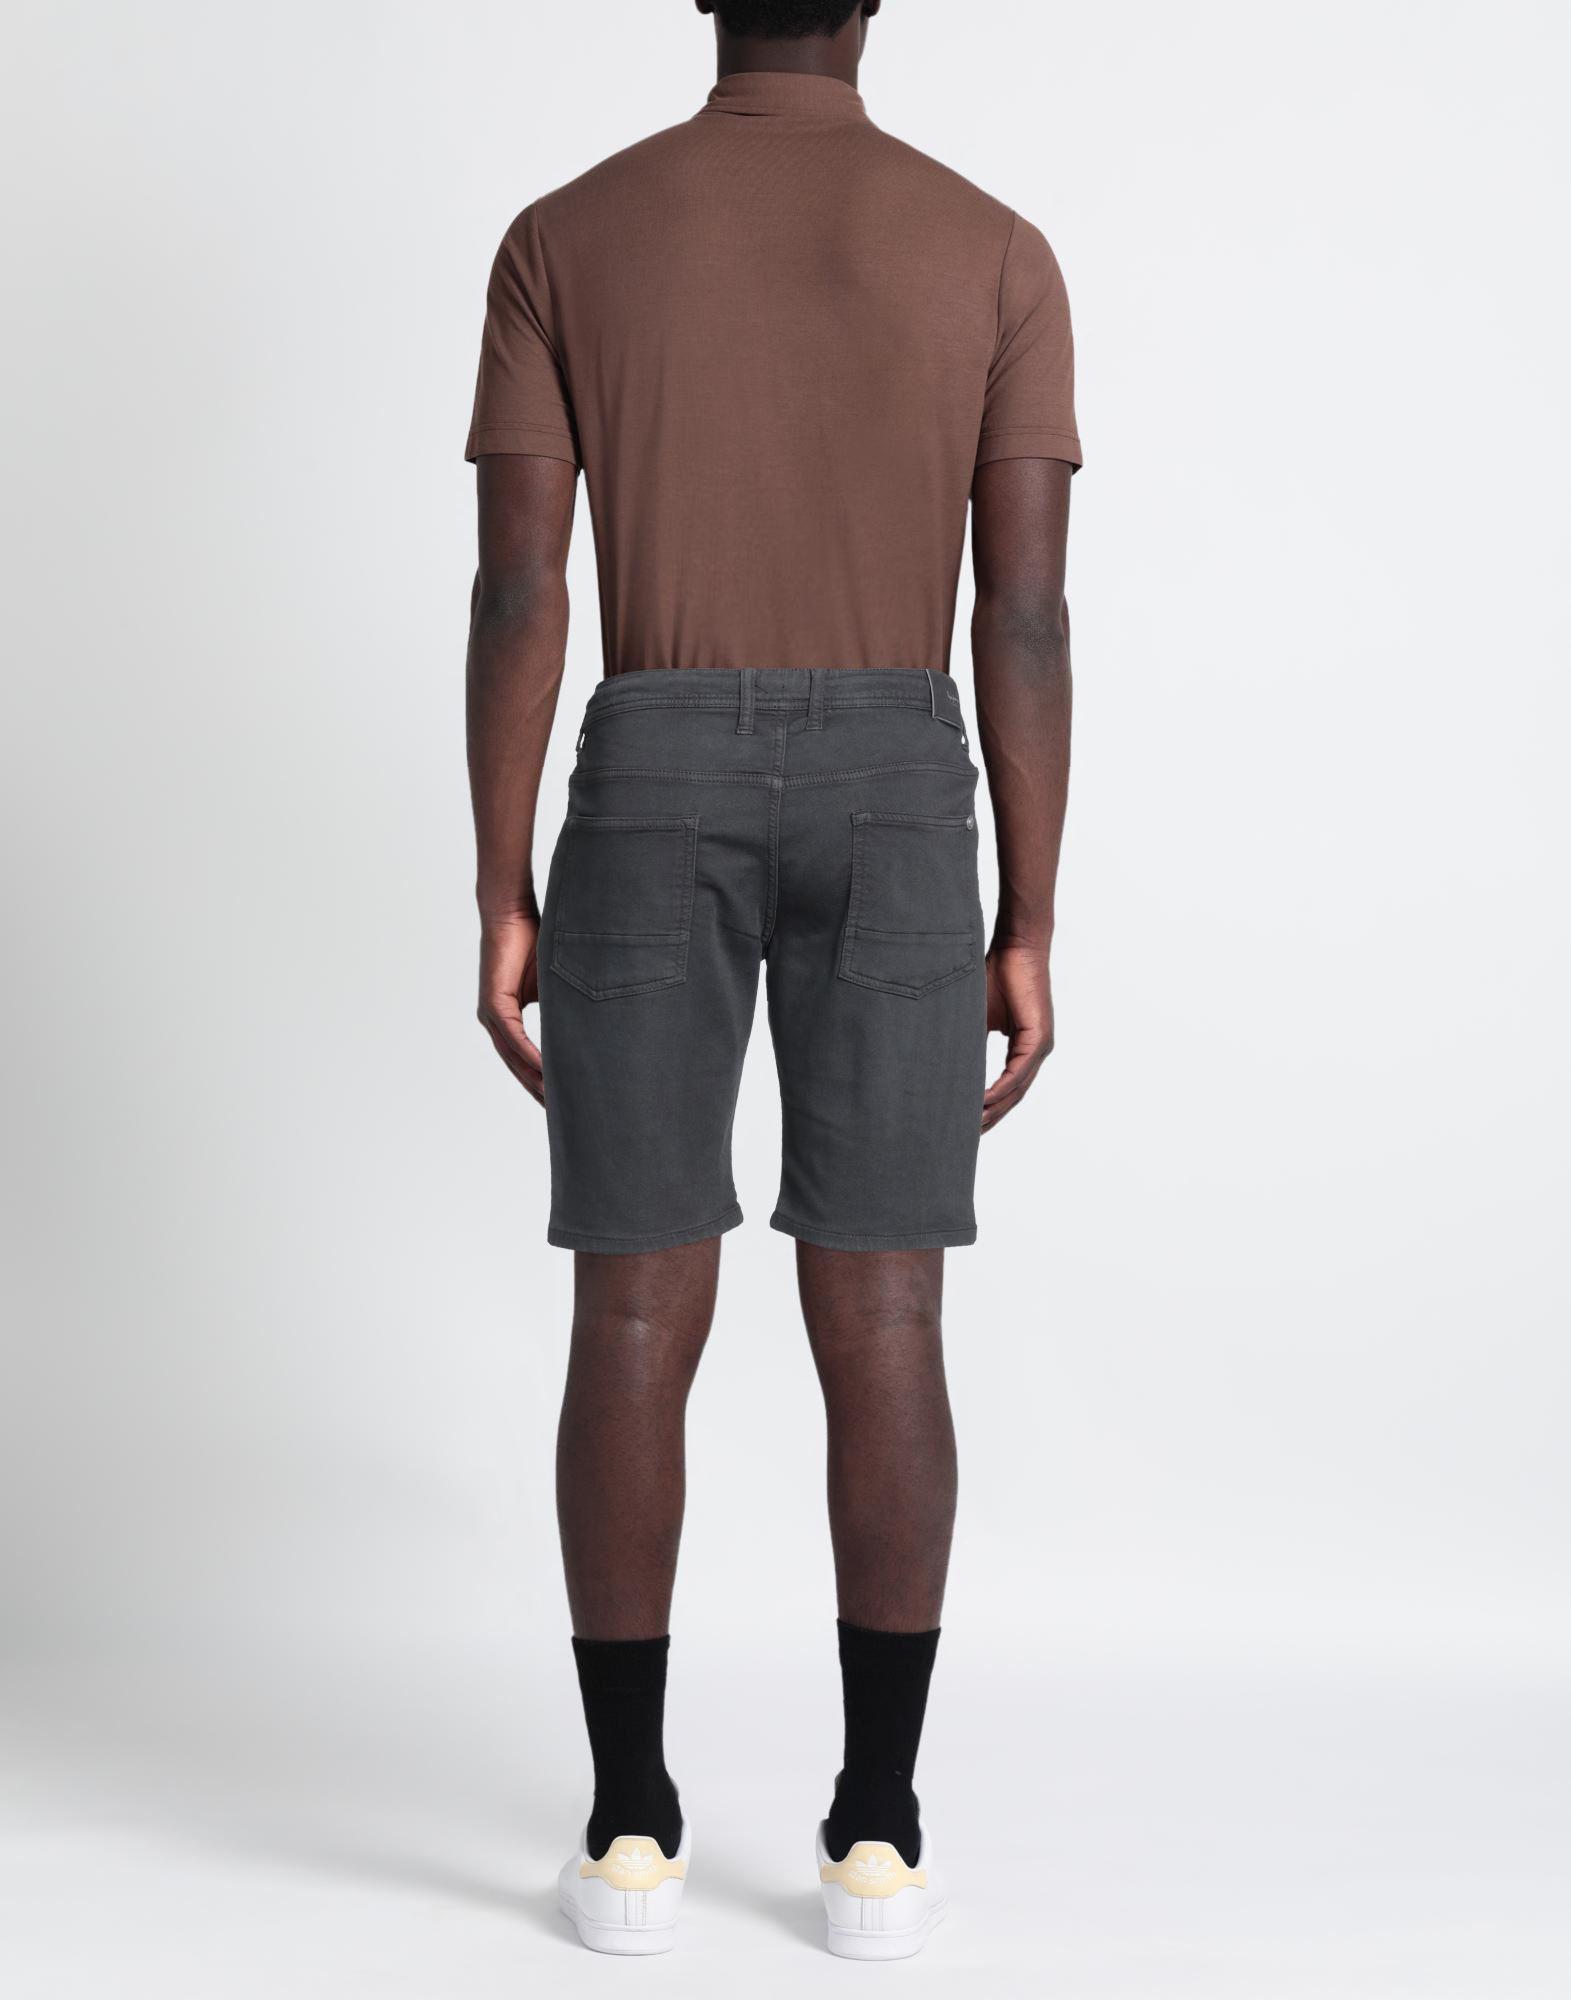 Pepe Jeans Shorts & Bermuda Shorts in Gray for Men | Lyst